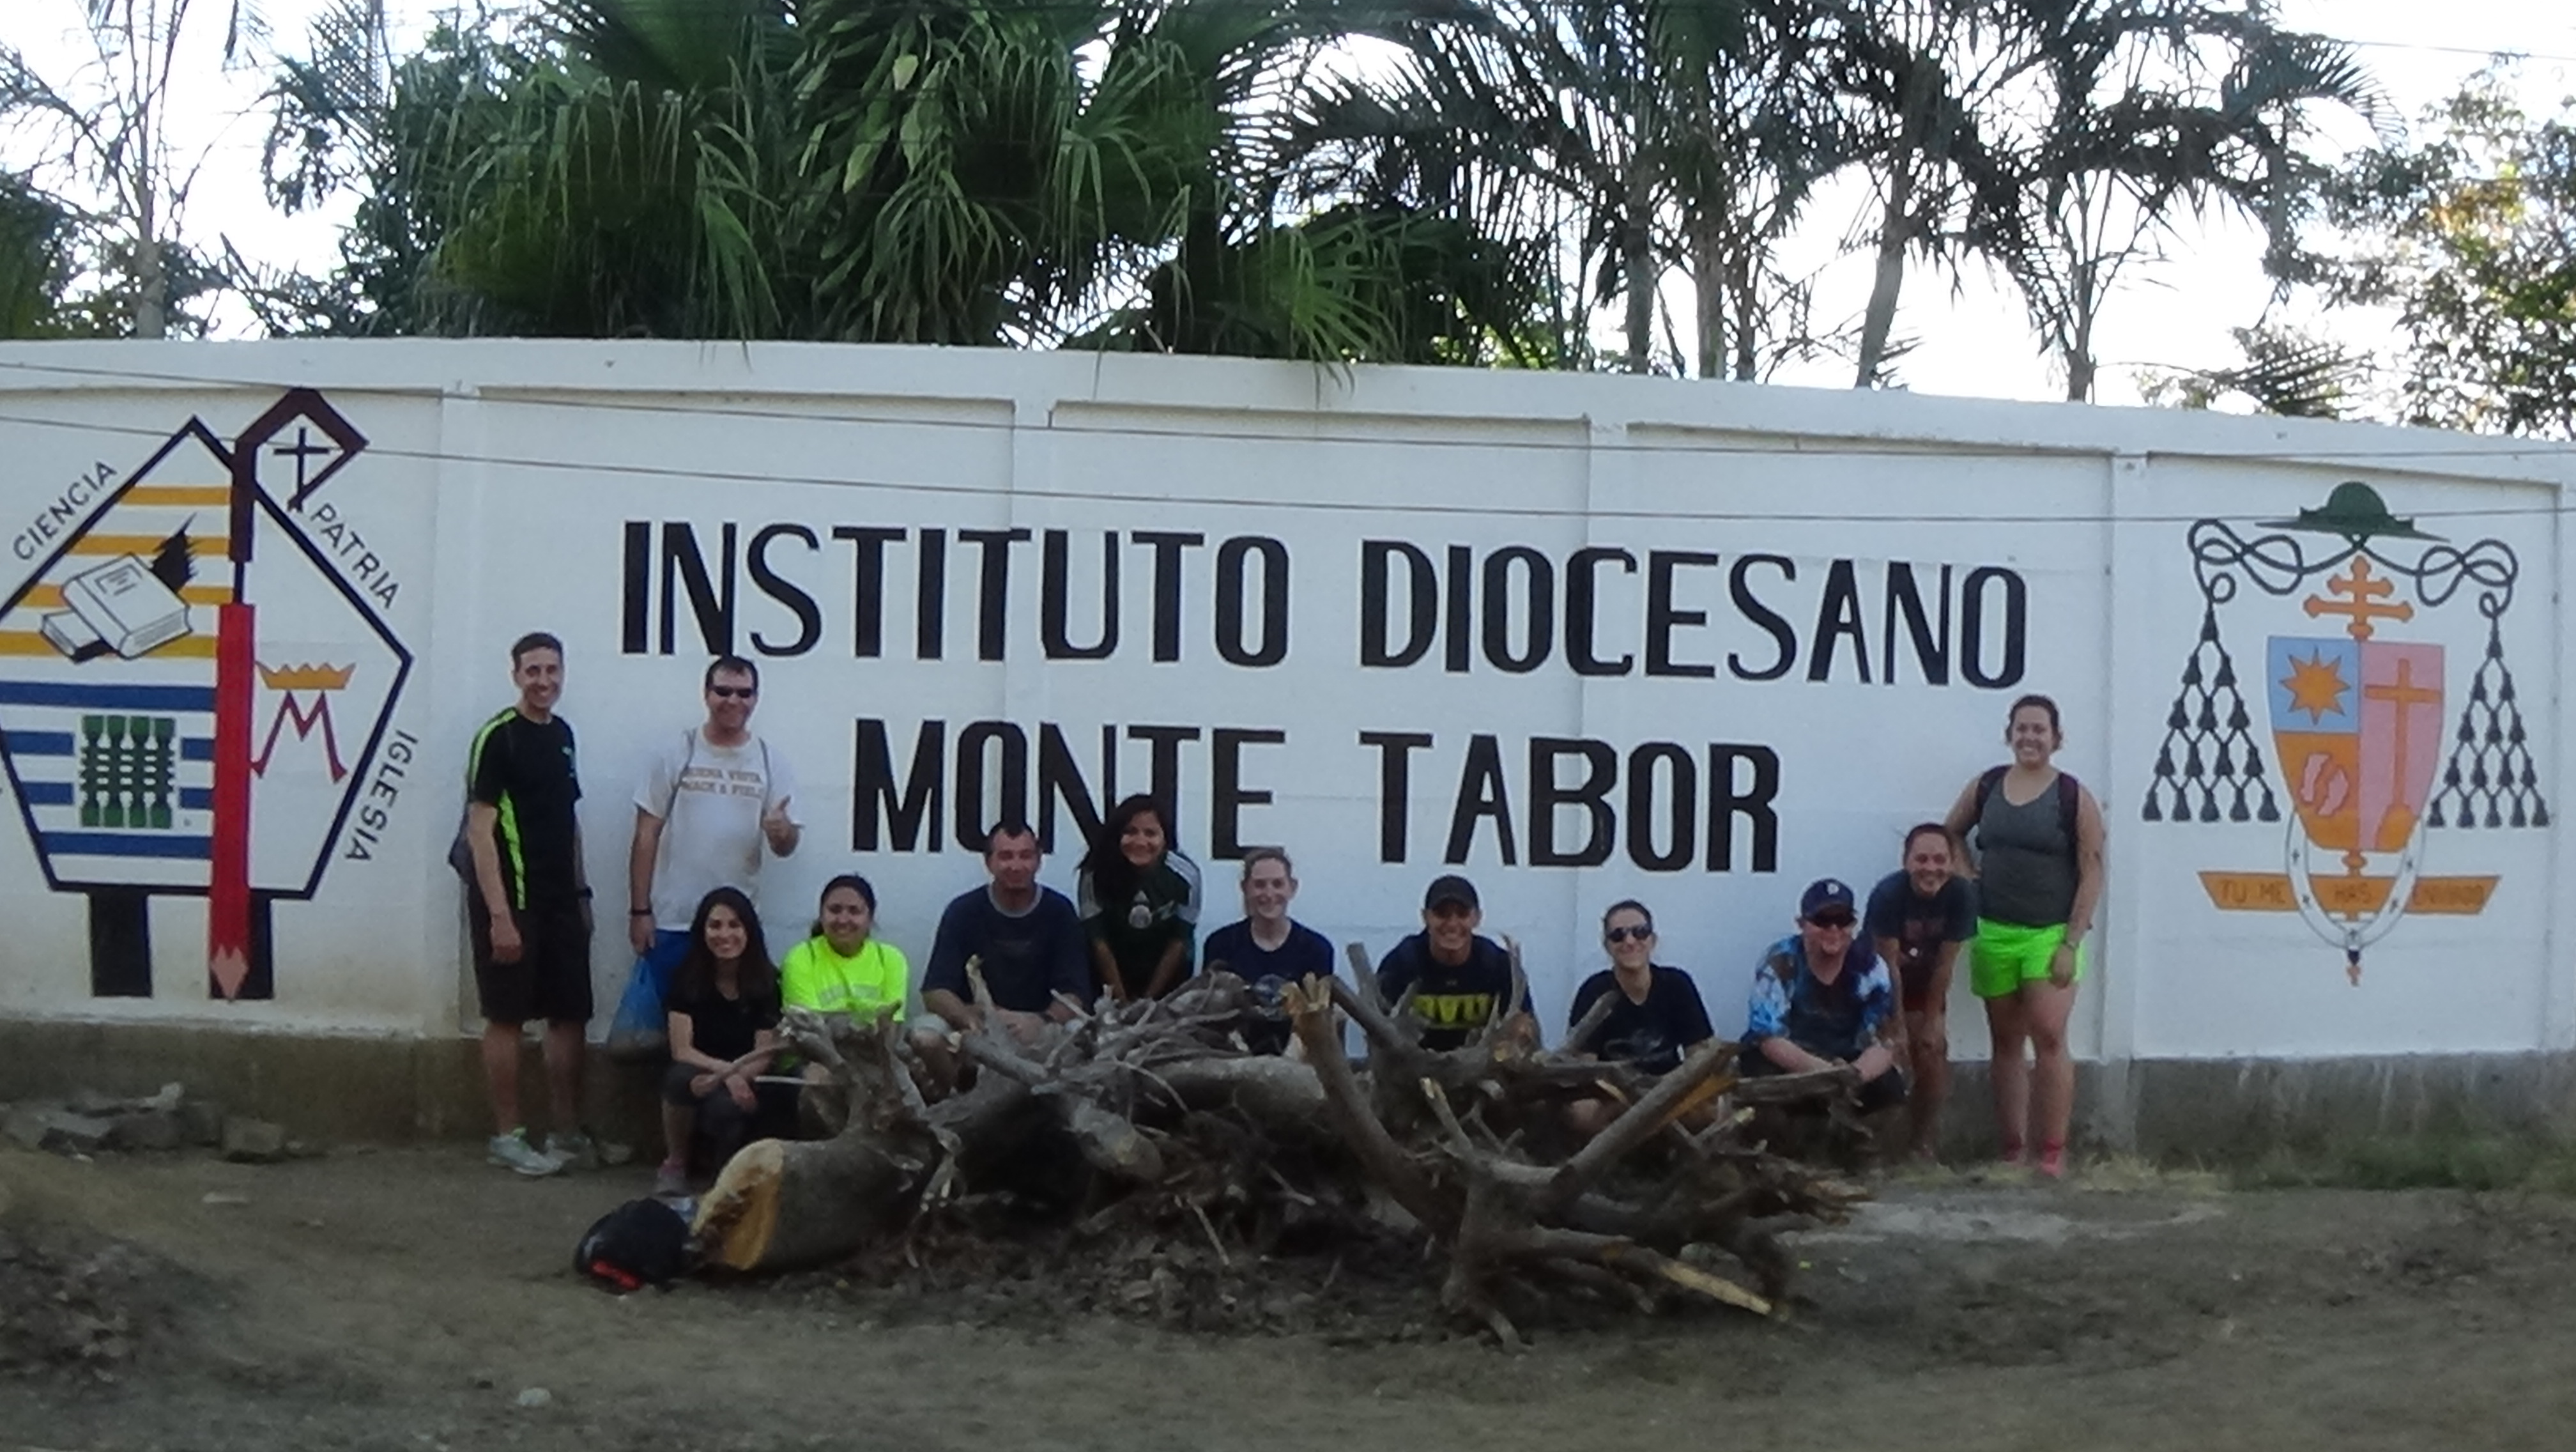 BVU students who participated in the AWOL developing communities trip in Nicaragua